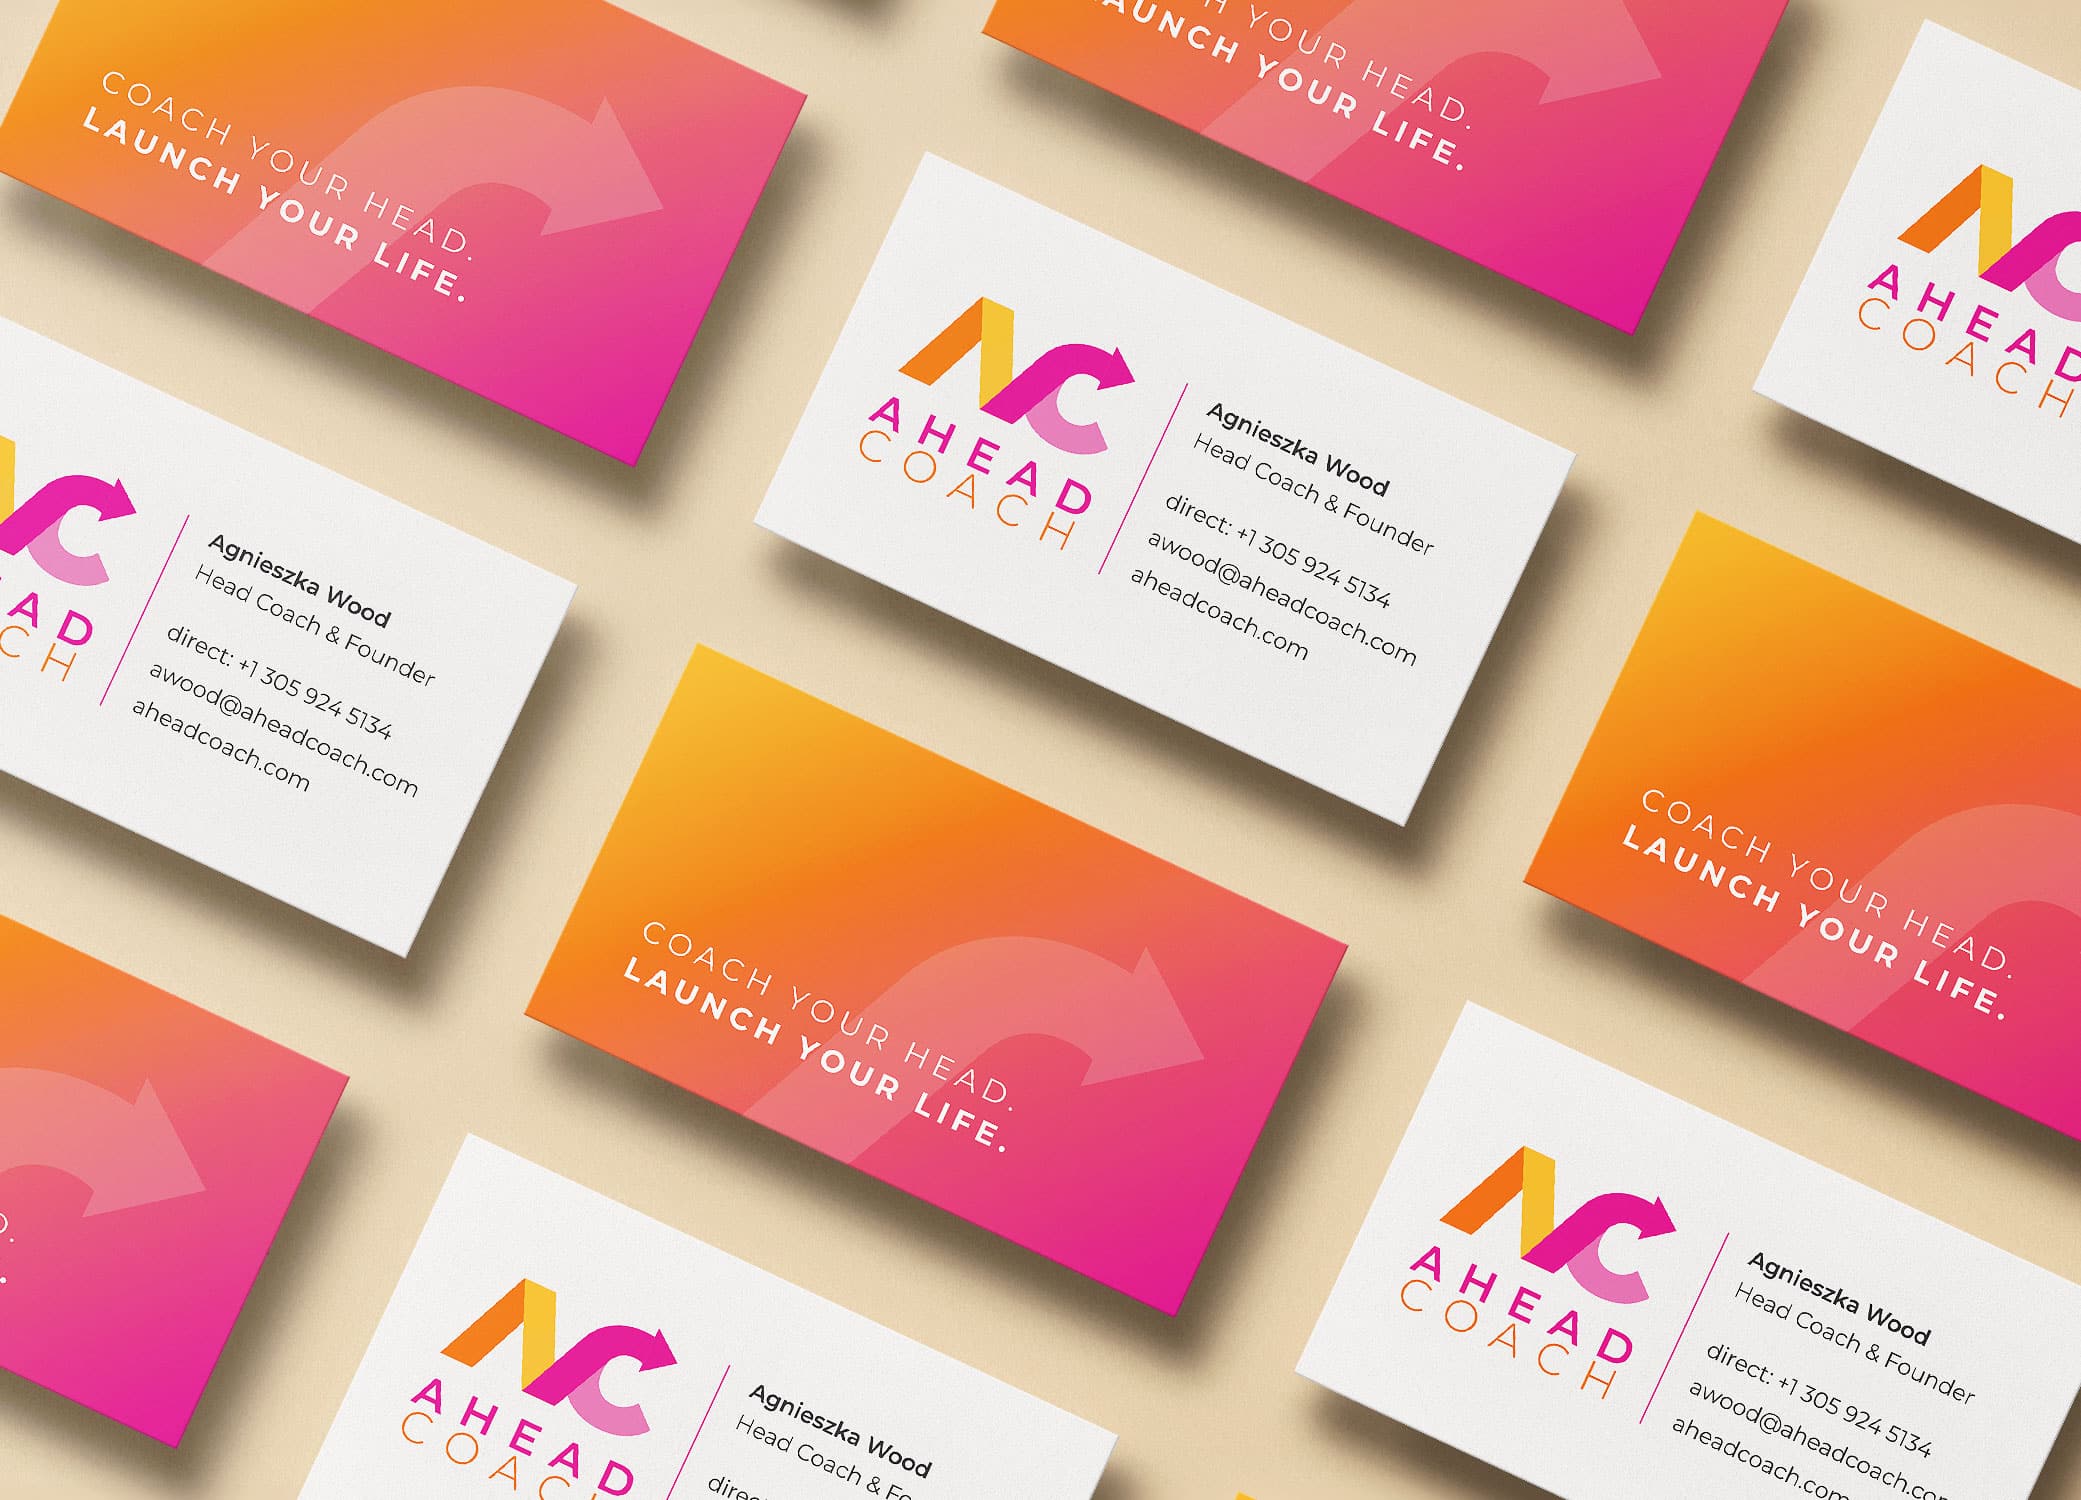 Ahead Coach business cards arranged in diagonal rows to show front and back view.